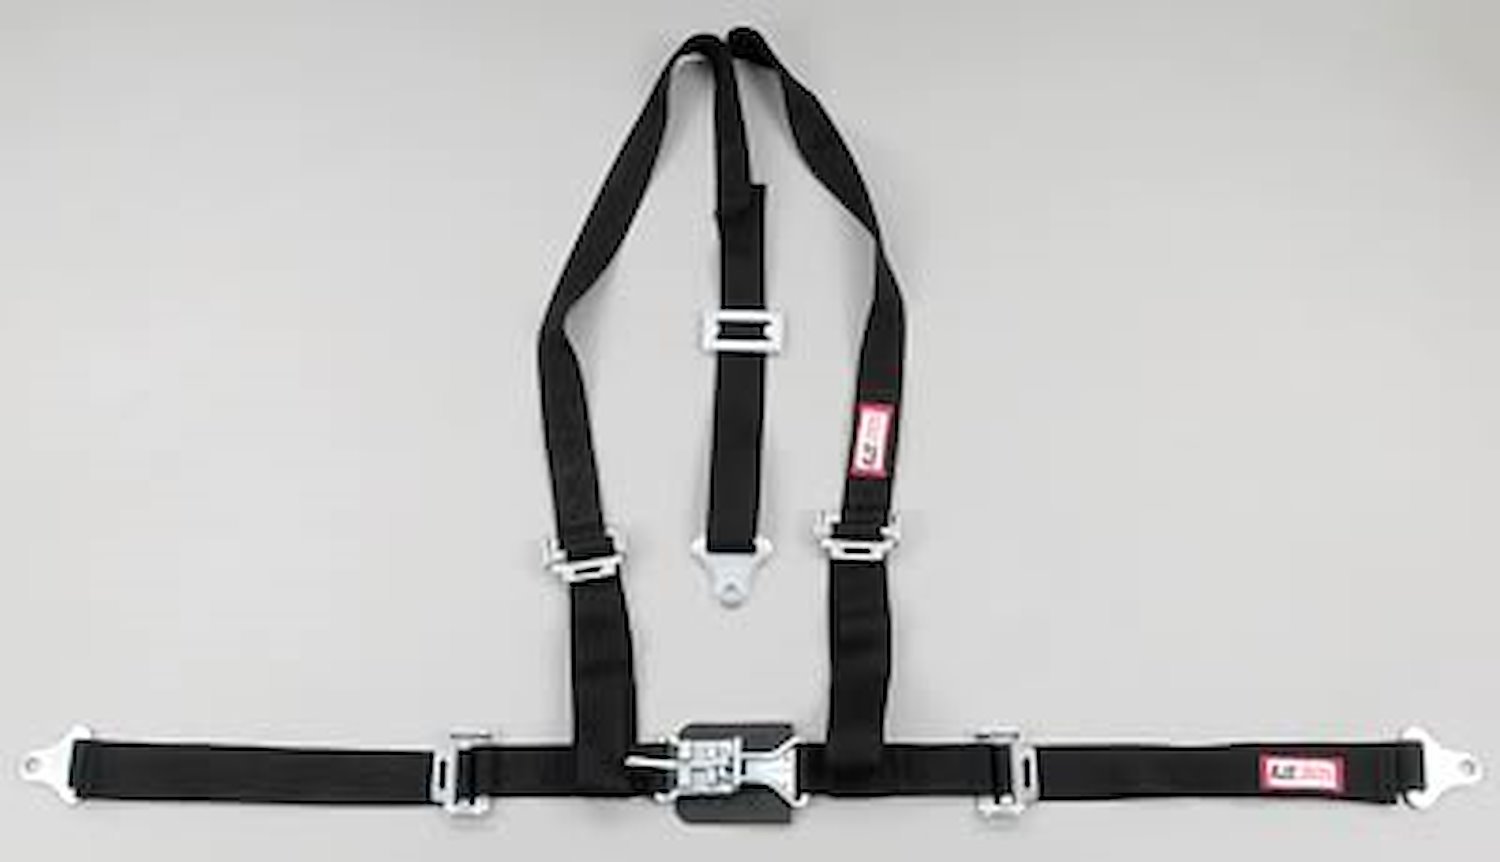 NON-SFI L&L HARNESS 3 PULL UP Lap Belt SEWN IN 2 Shoulder Harness V ROLL BAR Mount w/STERNUM STRAP ALL WRAP ENDS HOT PINK